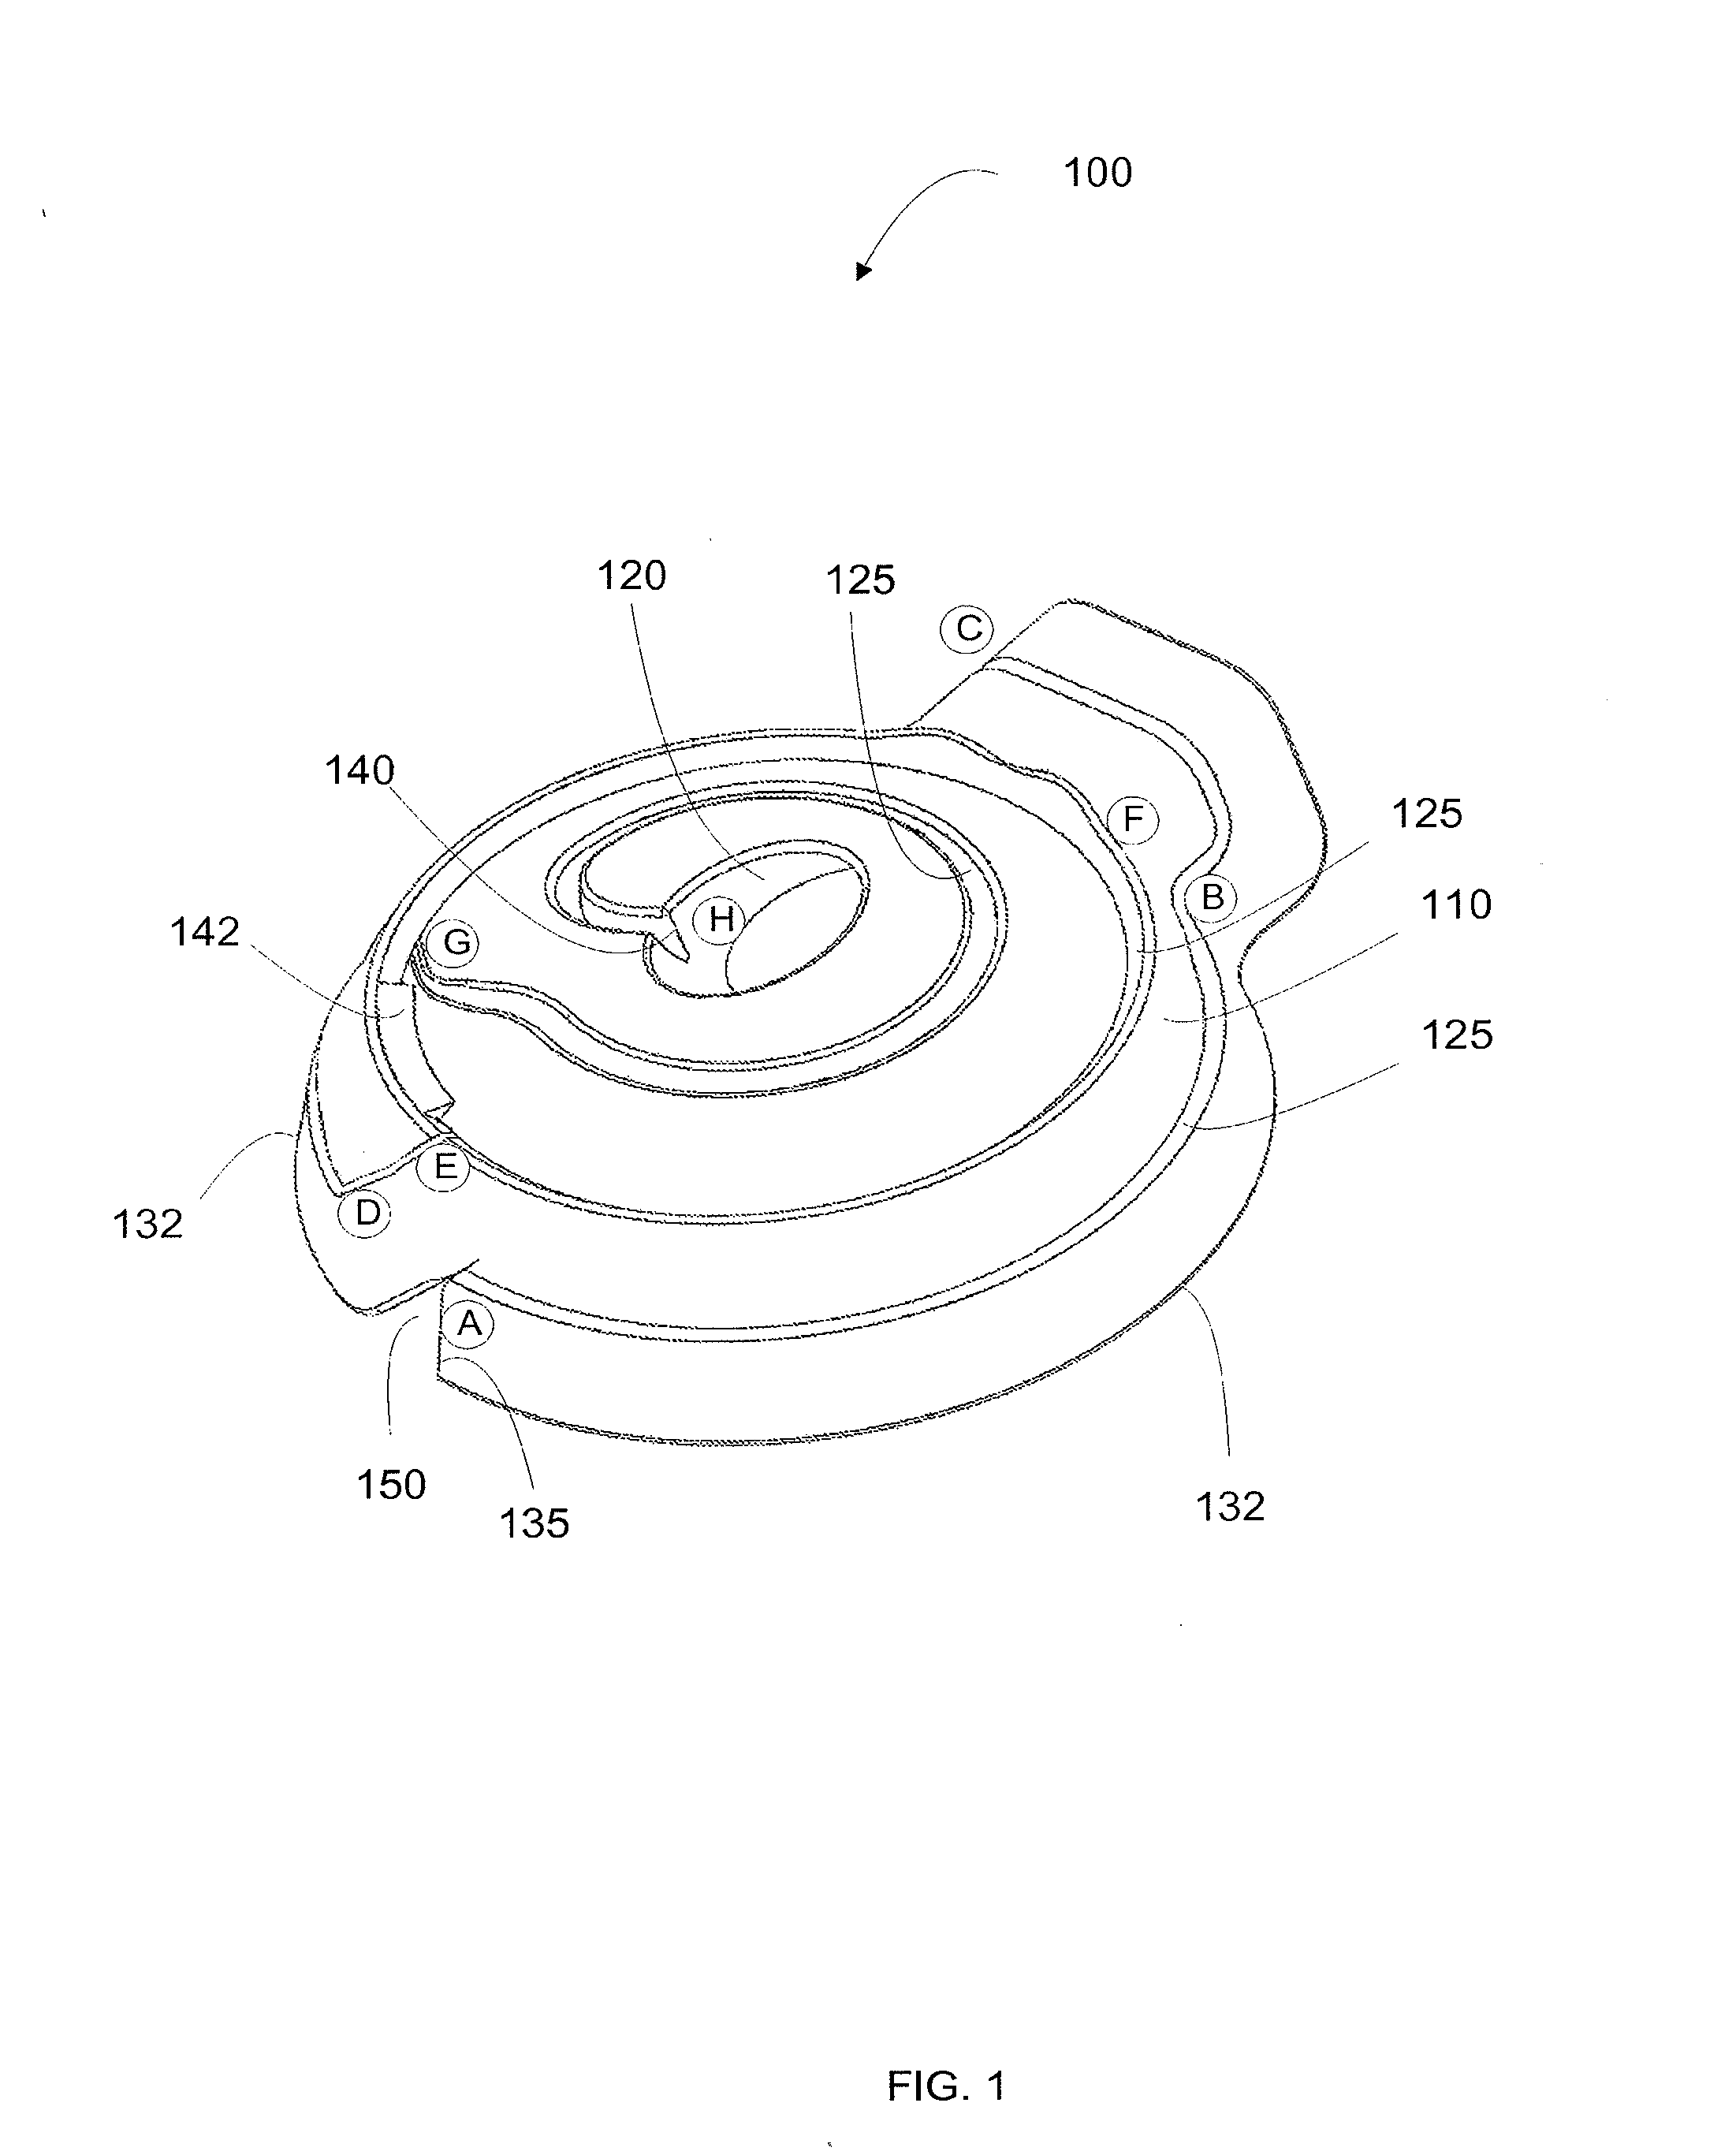 Deformable medical implant